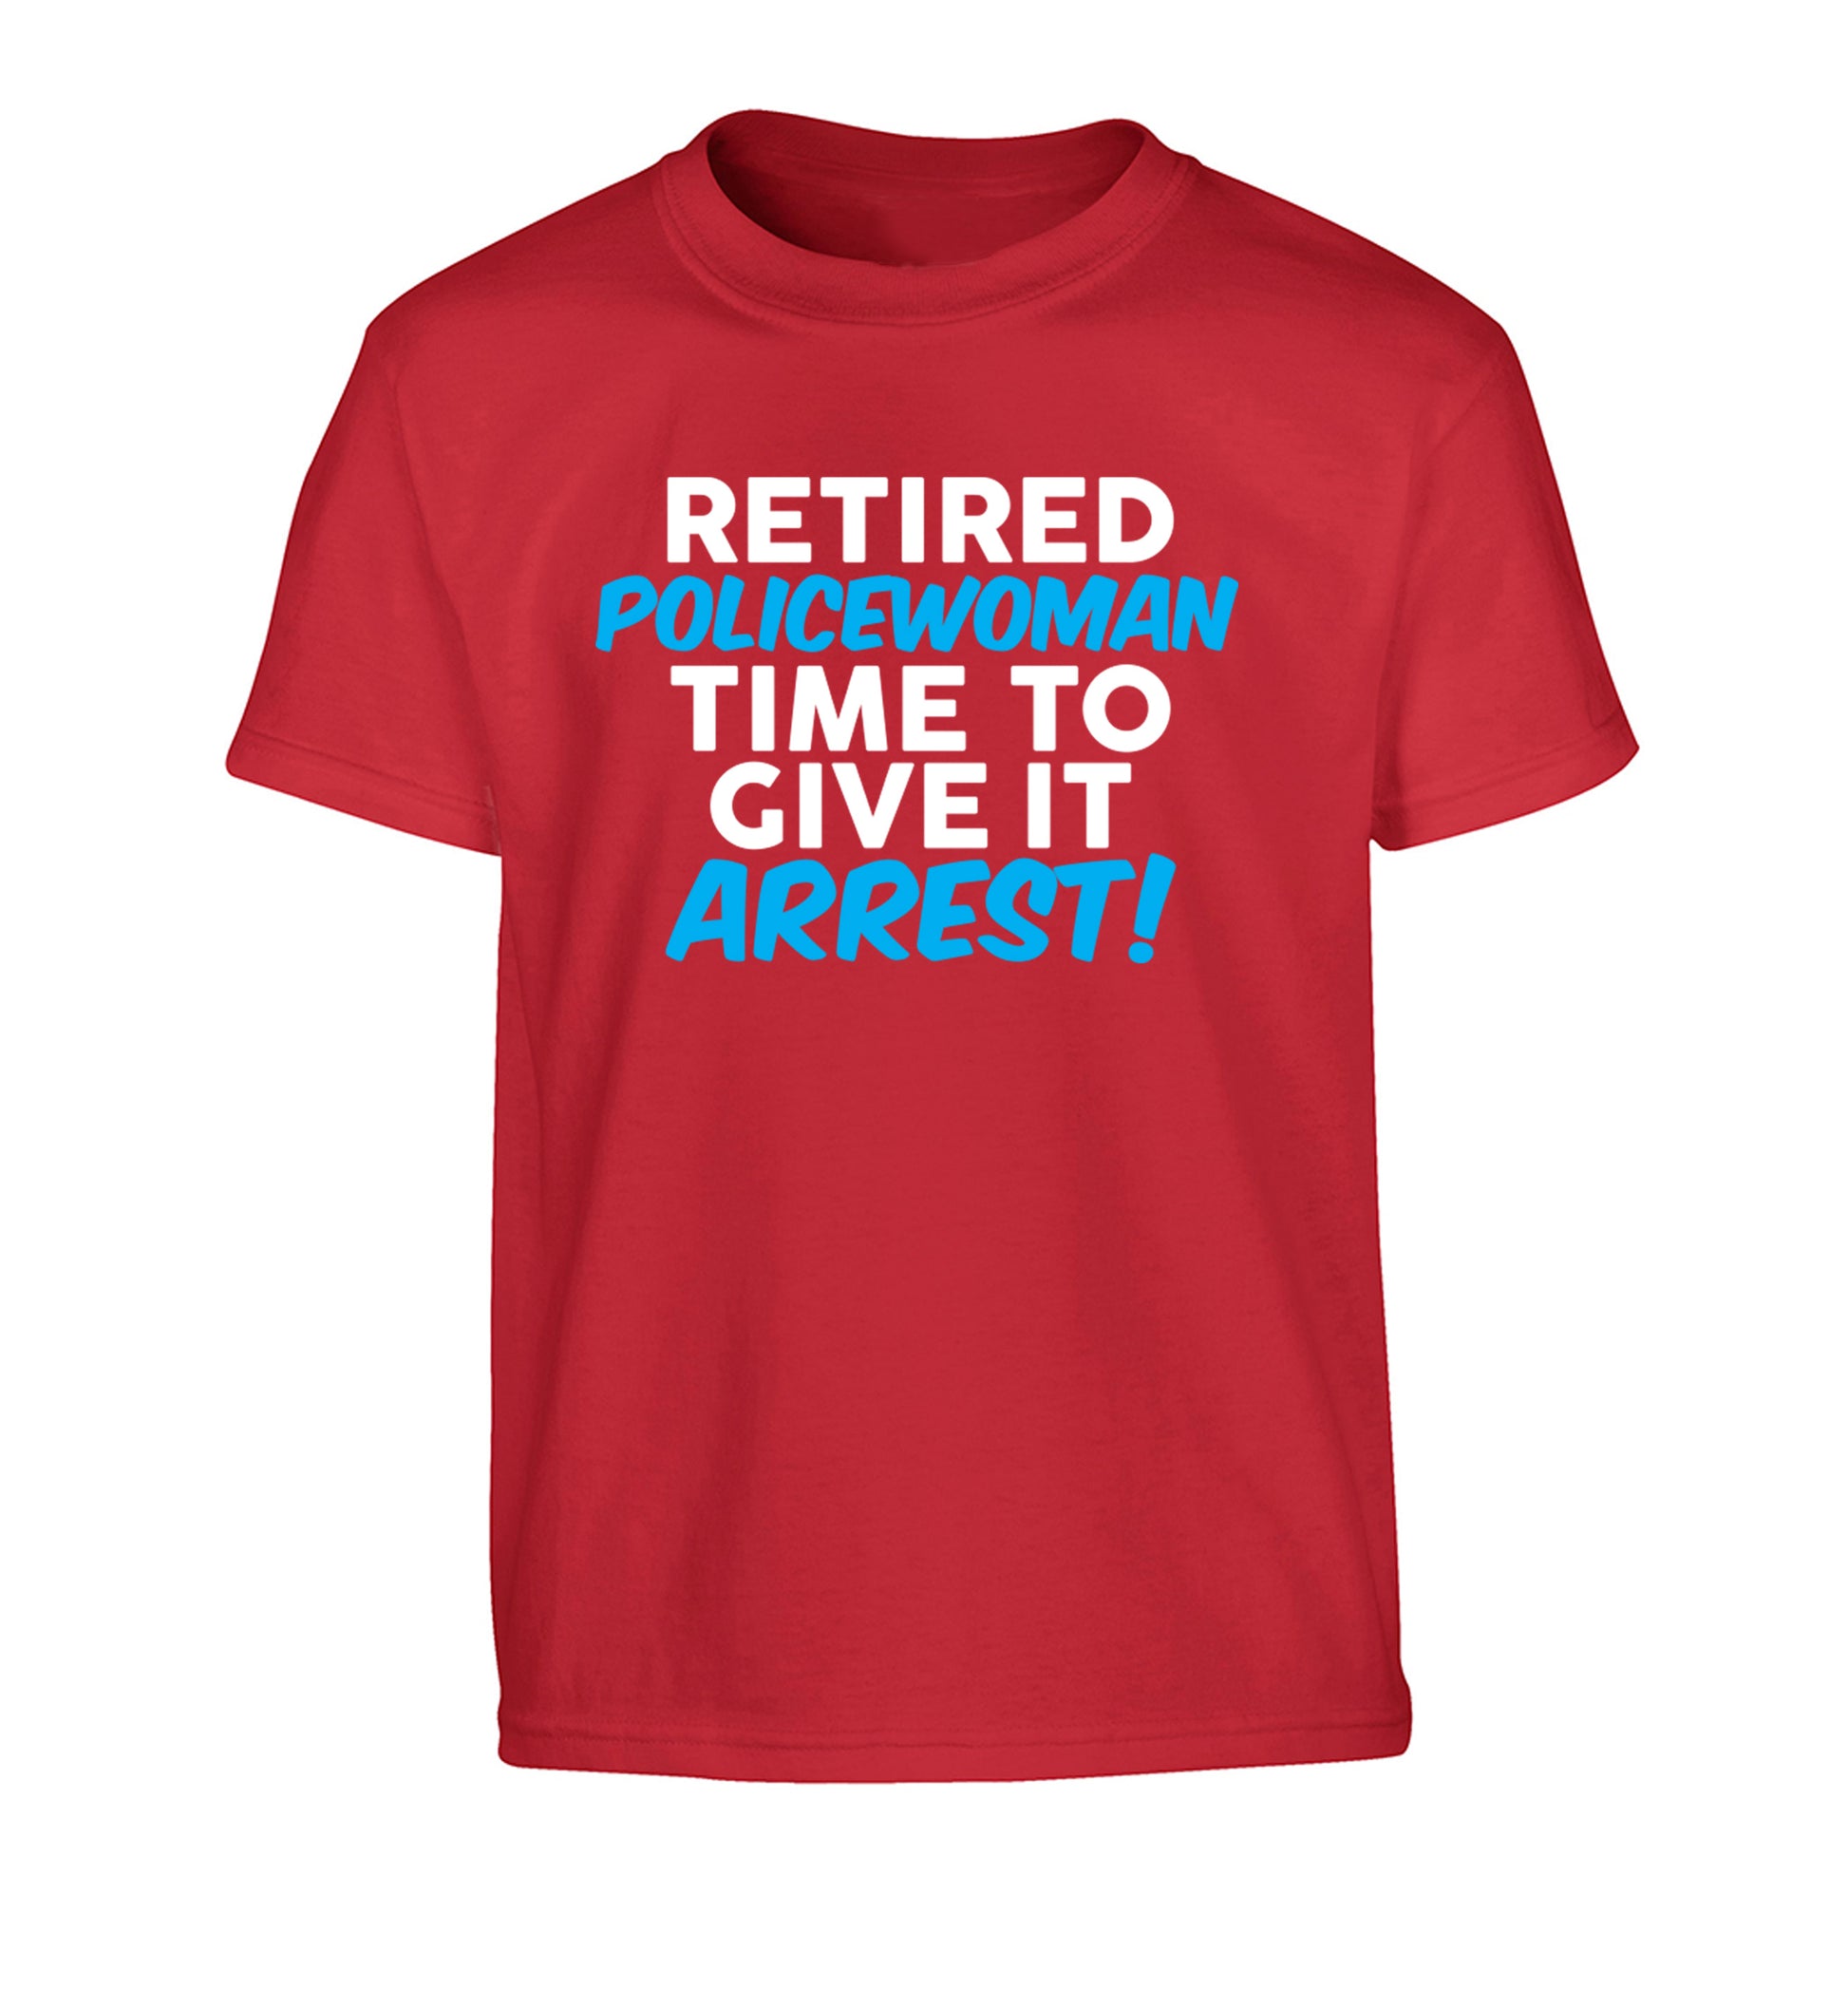 Retired policewoman time to give it arrest Children's red Tshirt 12-13 Years